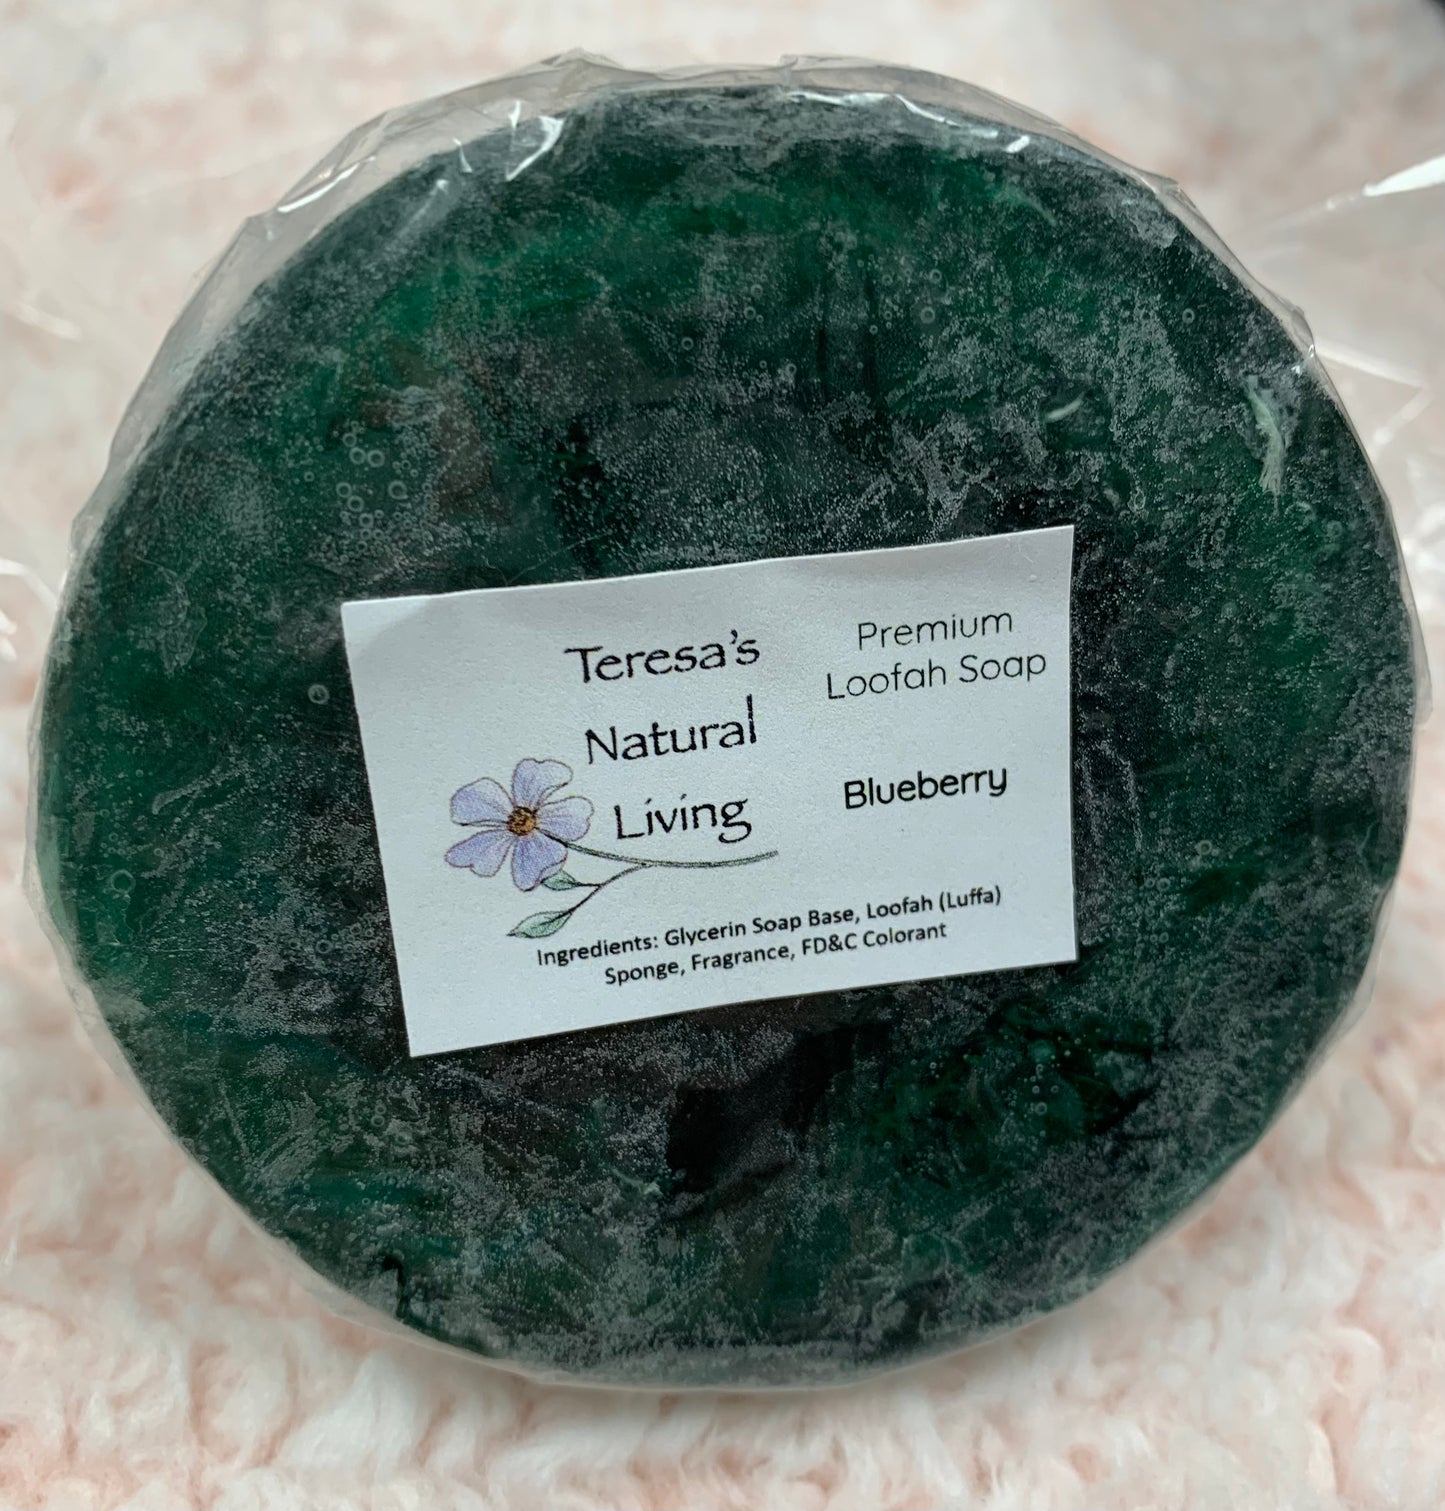 Blueberry Loofah Soap